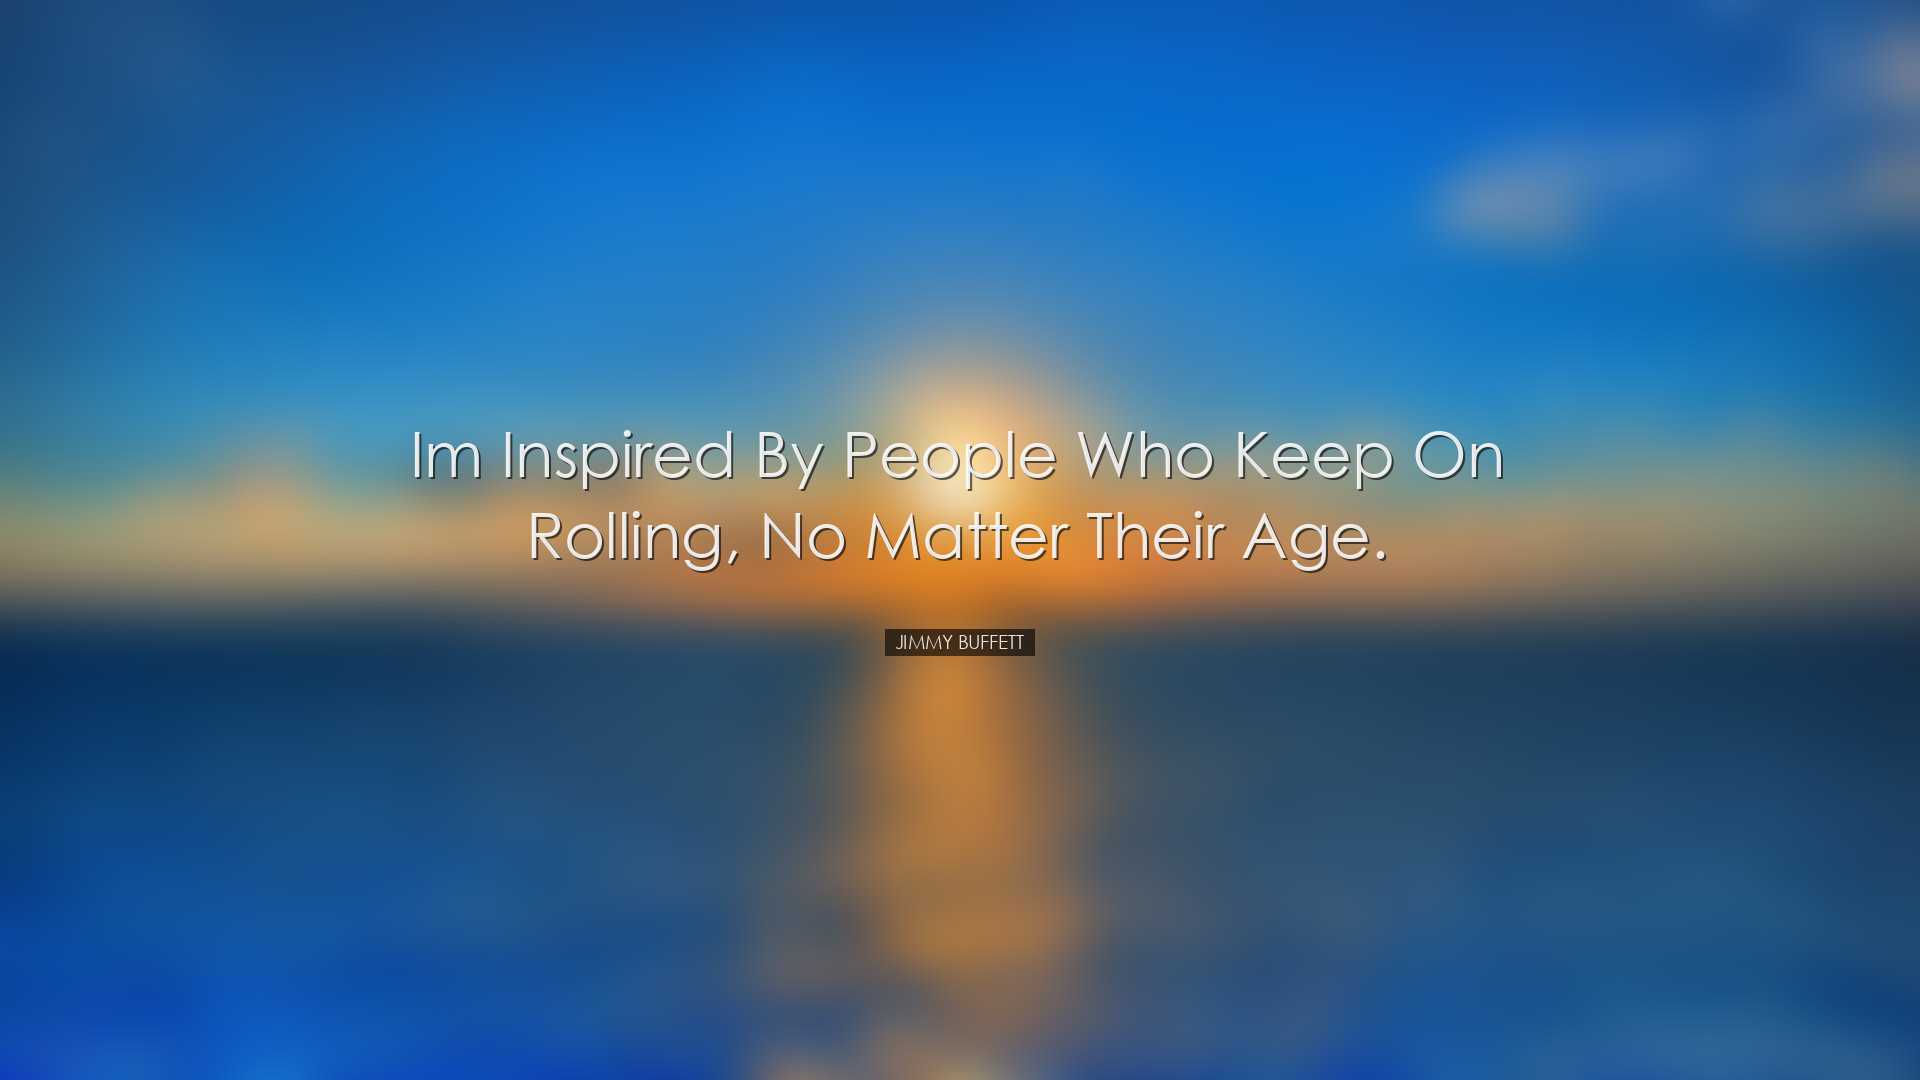 Im inspired by people who keep on rolling, no matter their age. -